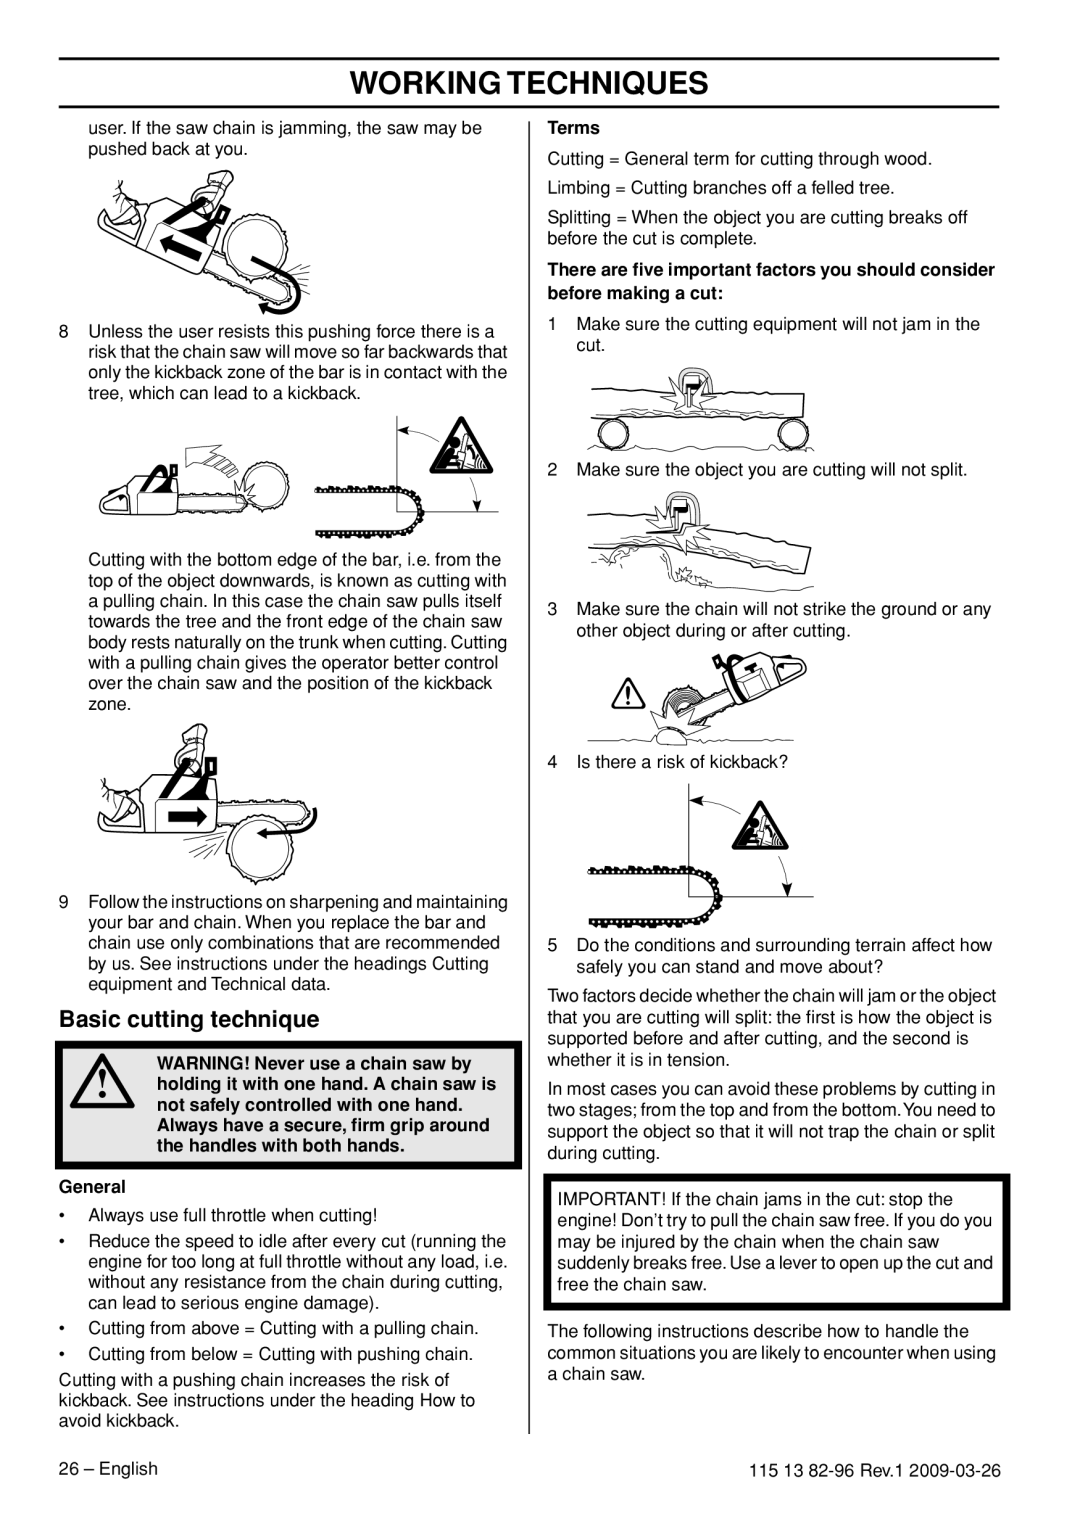 Husqvarna 460 Rancher manual Basic cutting technique, WARNING! Never use a chain saw by, General, Terms, Working Techniques 